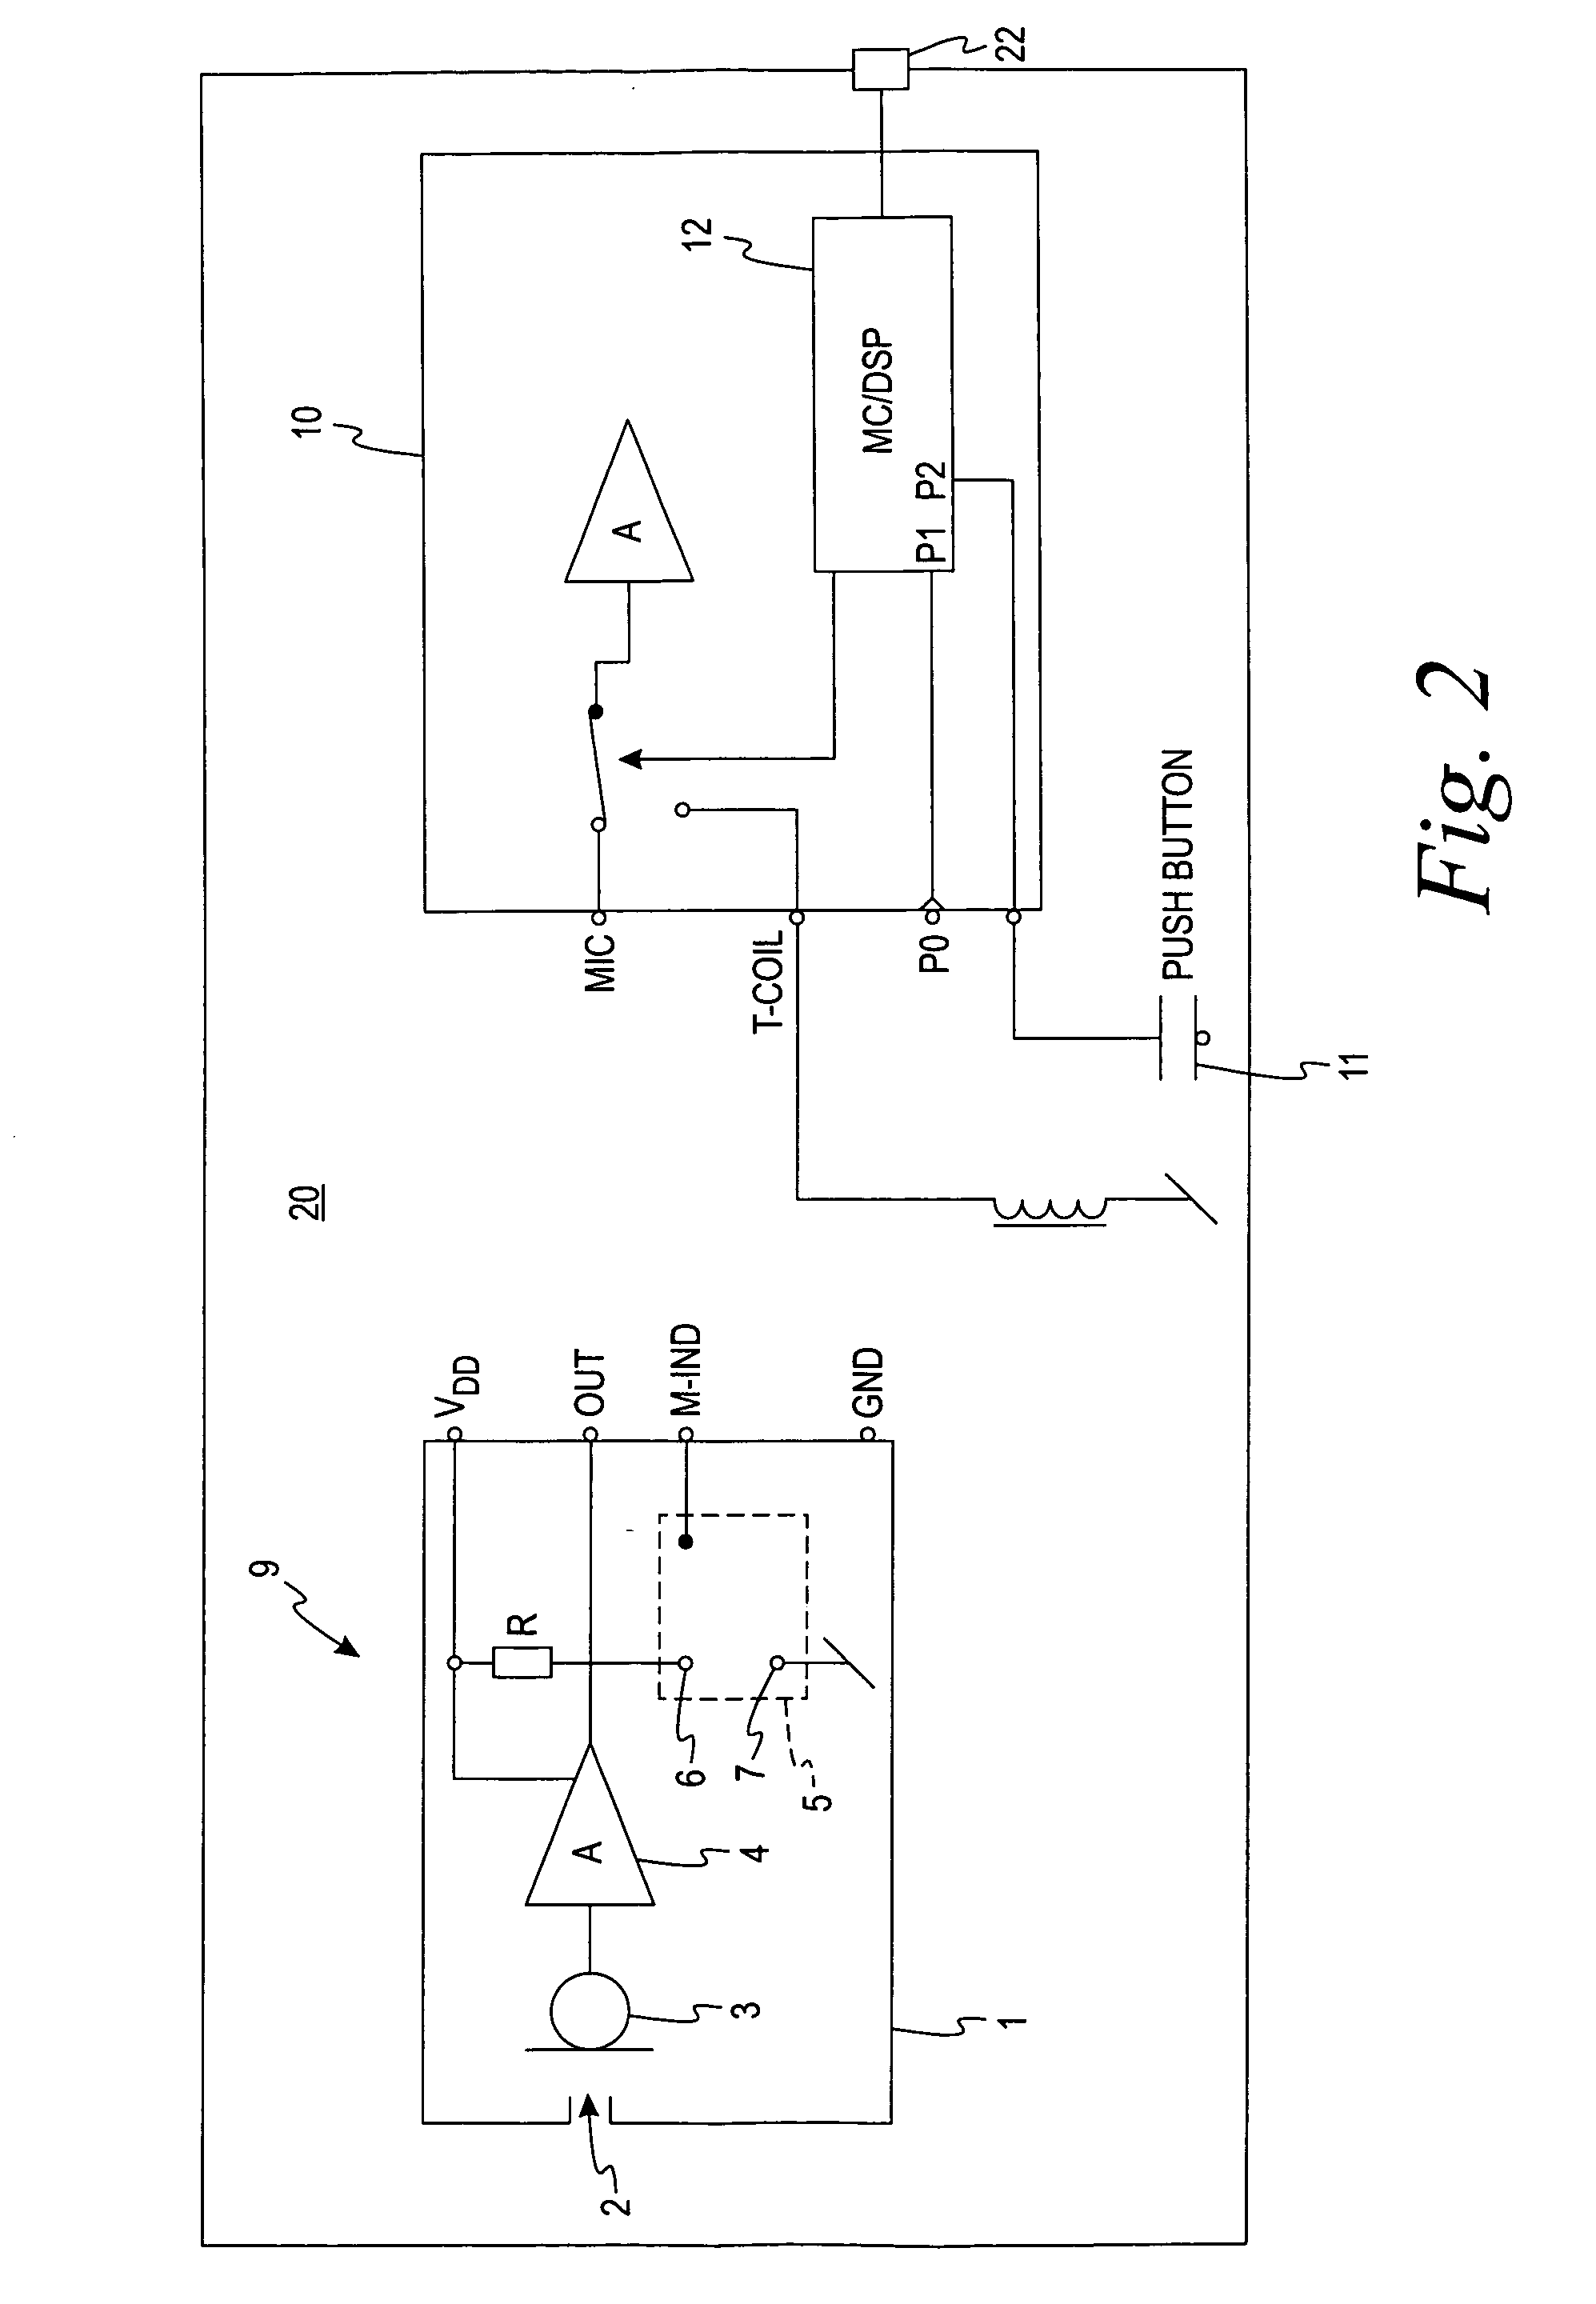 Microphone assembly comprising magnetically activatable element for signal switching and field indication